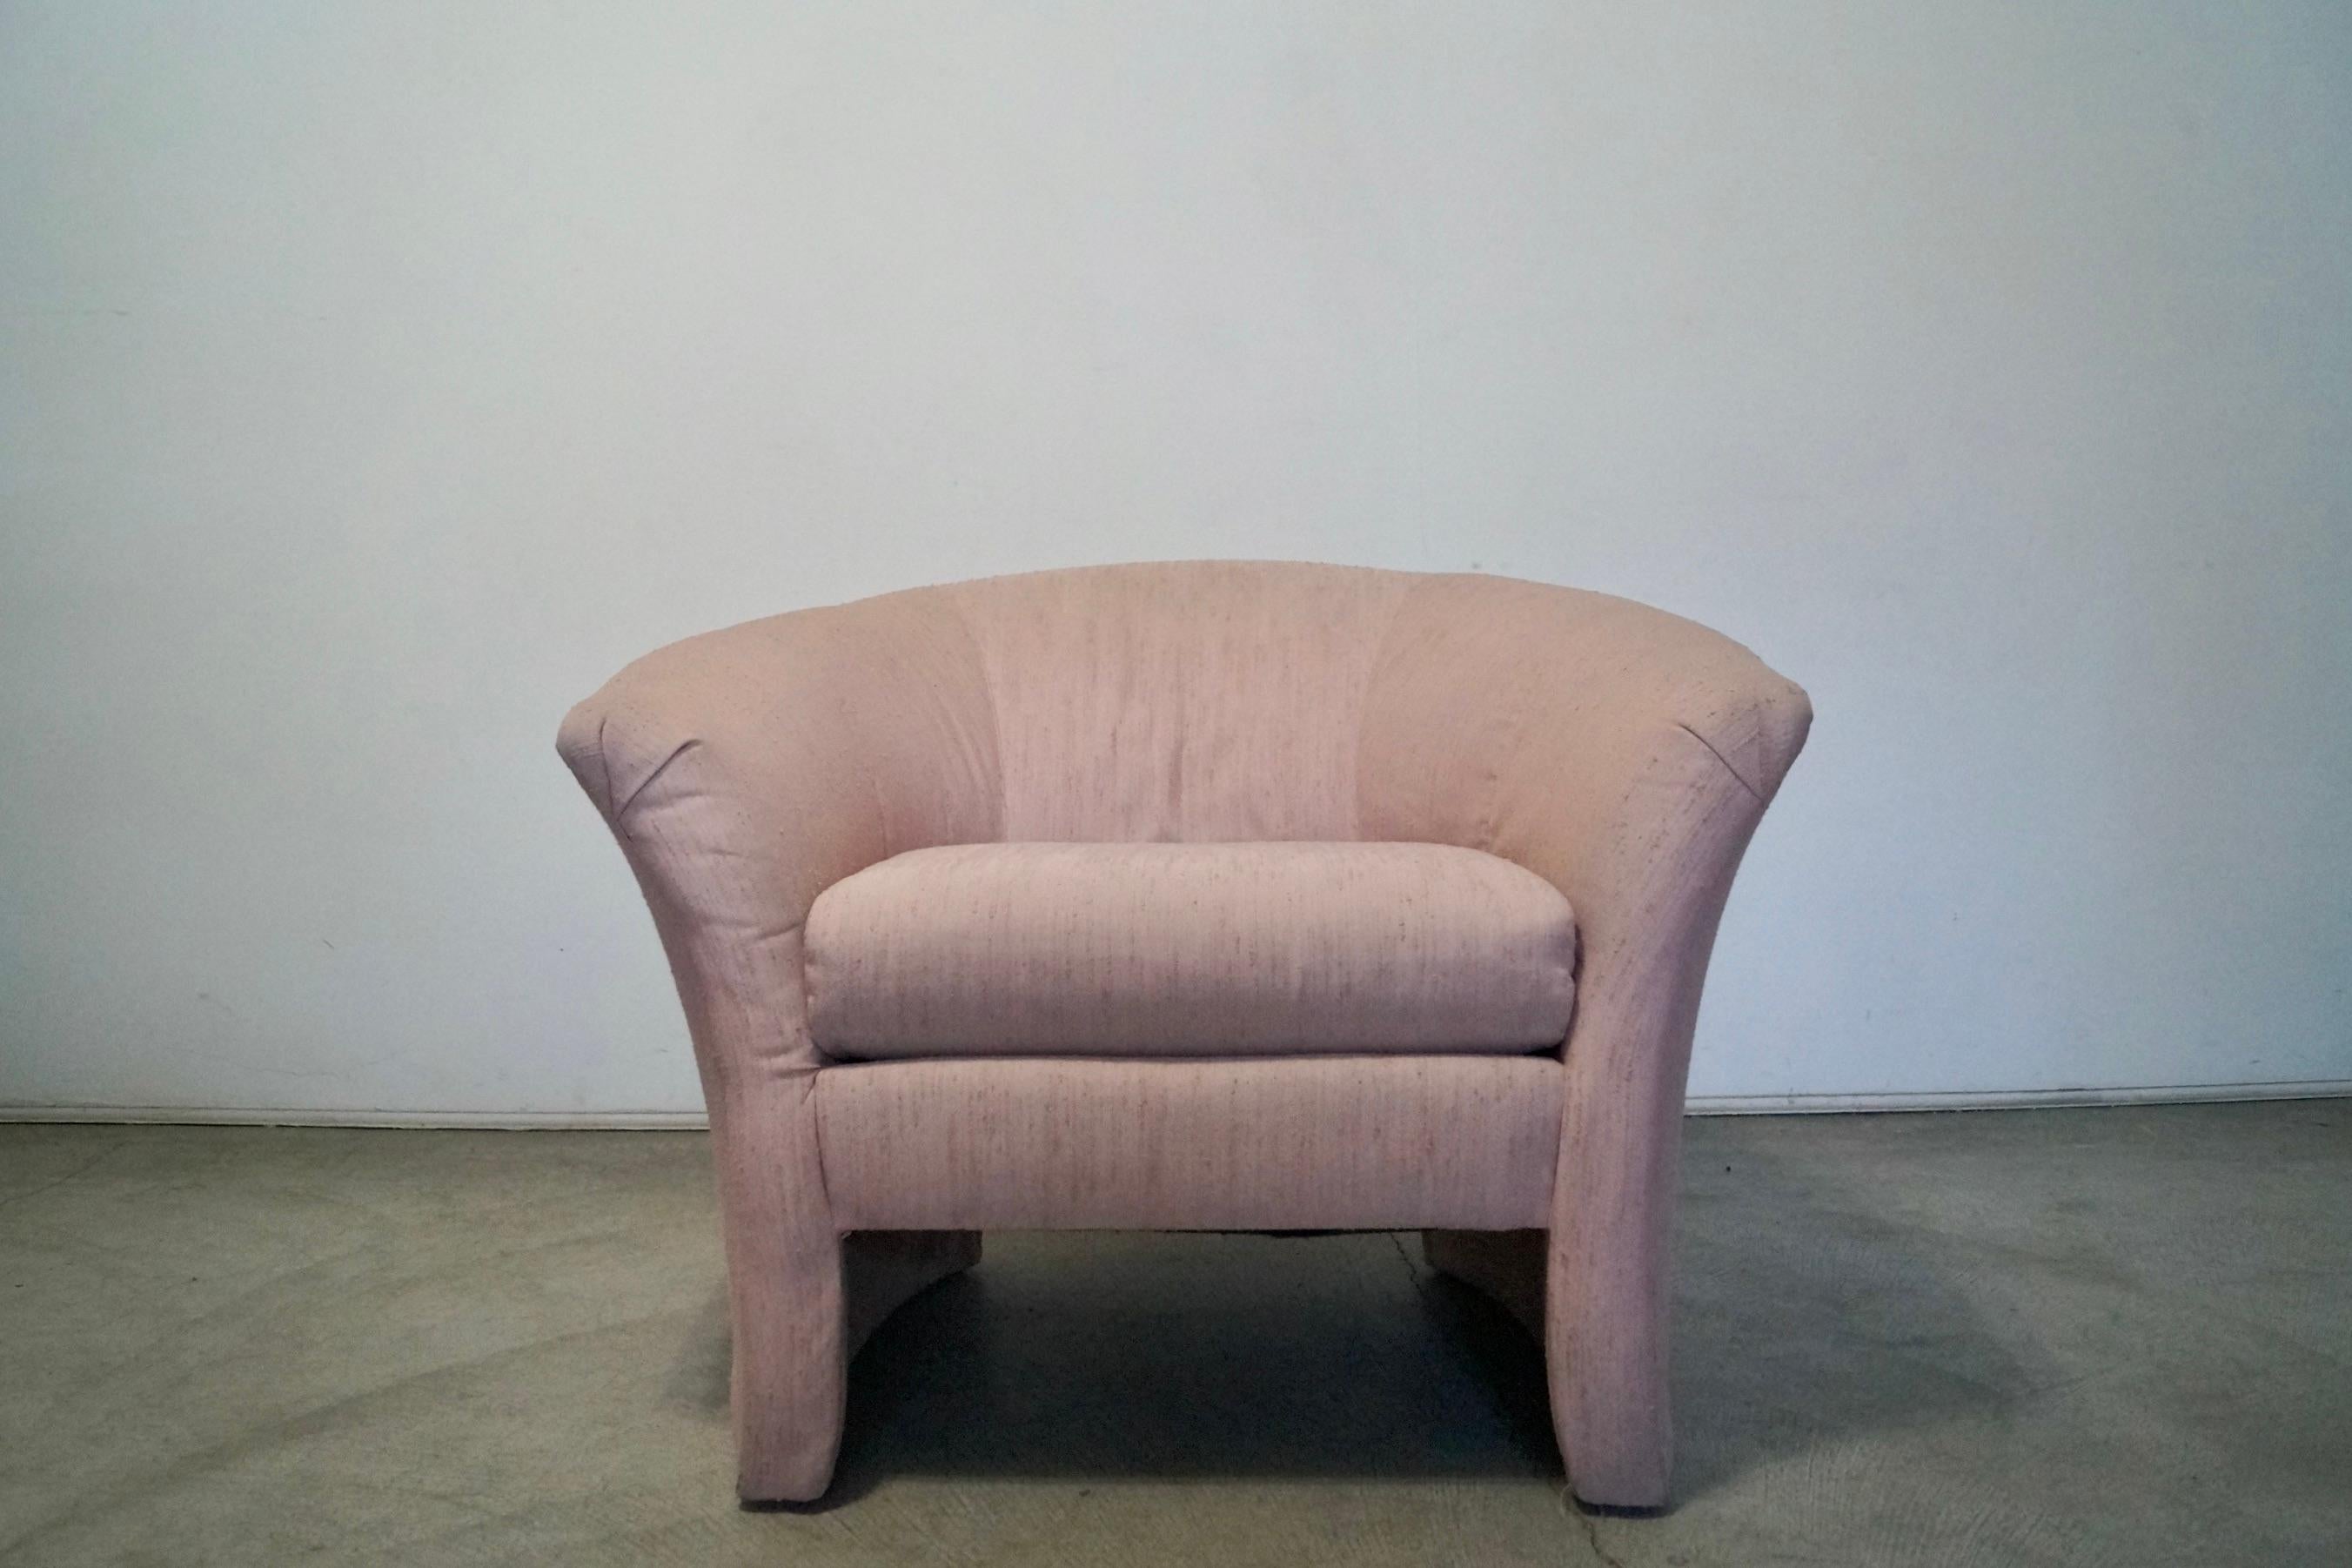 Vintage post-modern art deco barrel chair for sale. Very comfortable and well made. Has a great barrel back design with a great back. Fully upholstered in the original vintage soft blush pink fabric. Fabric is old and worn. In the style of Vladimir